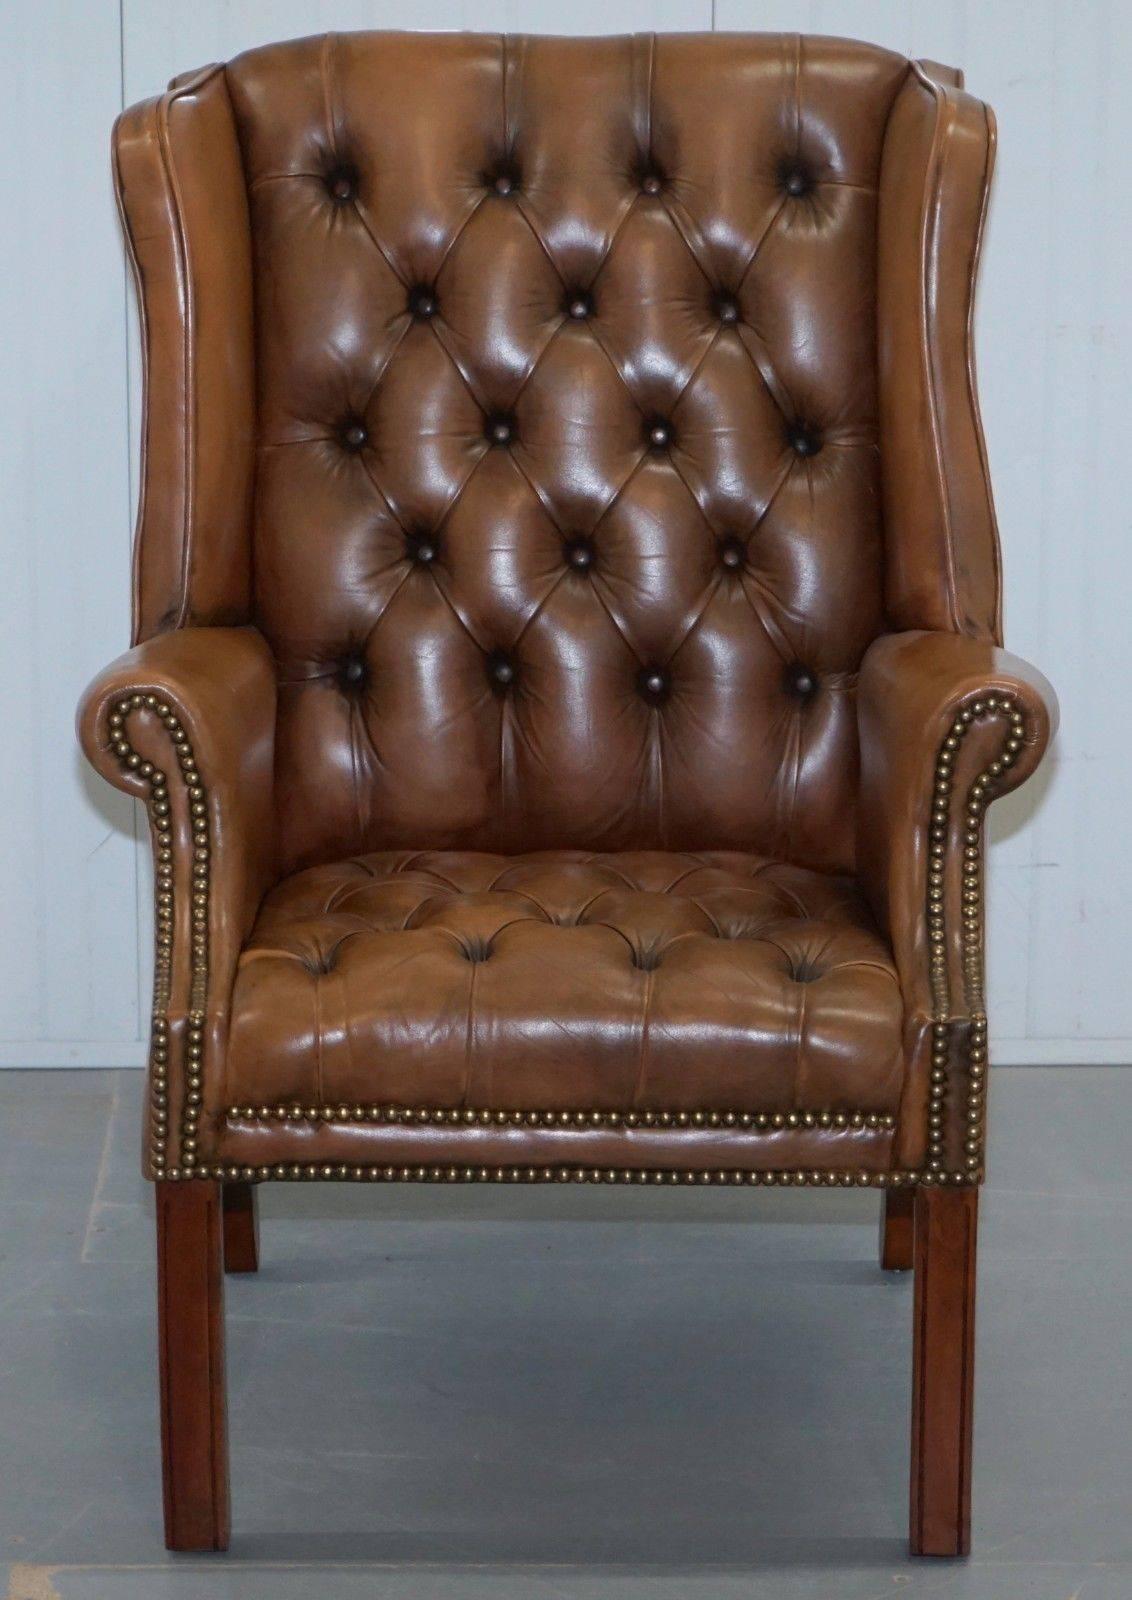 We are delighted to offer for sale this stunning vintage button base and back Chesterfield wingback armchair

A good looking and well-made piece with a lovely comfortable seating position

We have deep cleaned hand condition waxed and hand